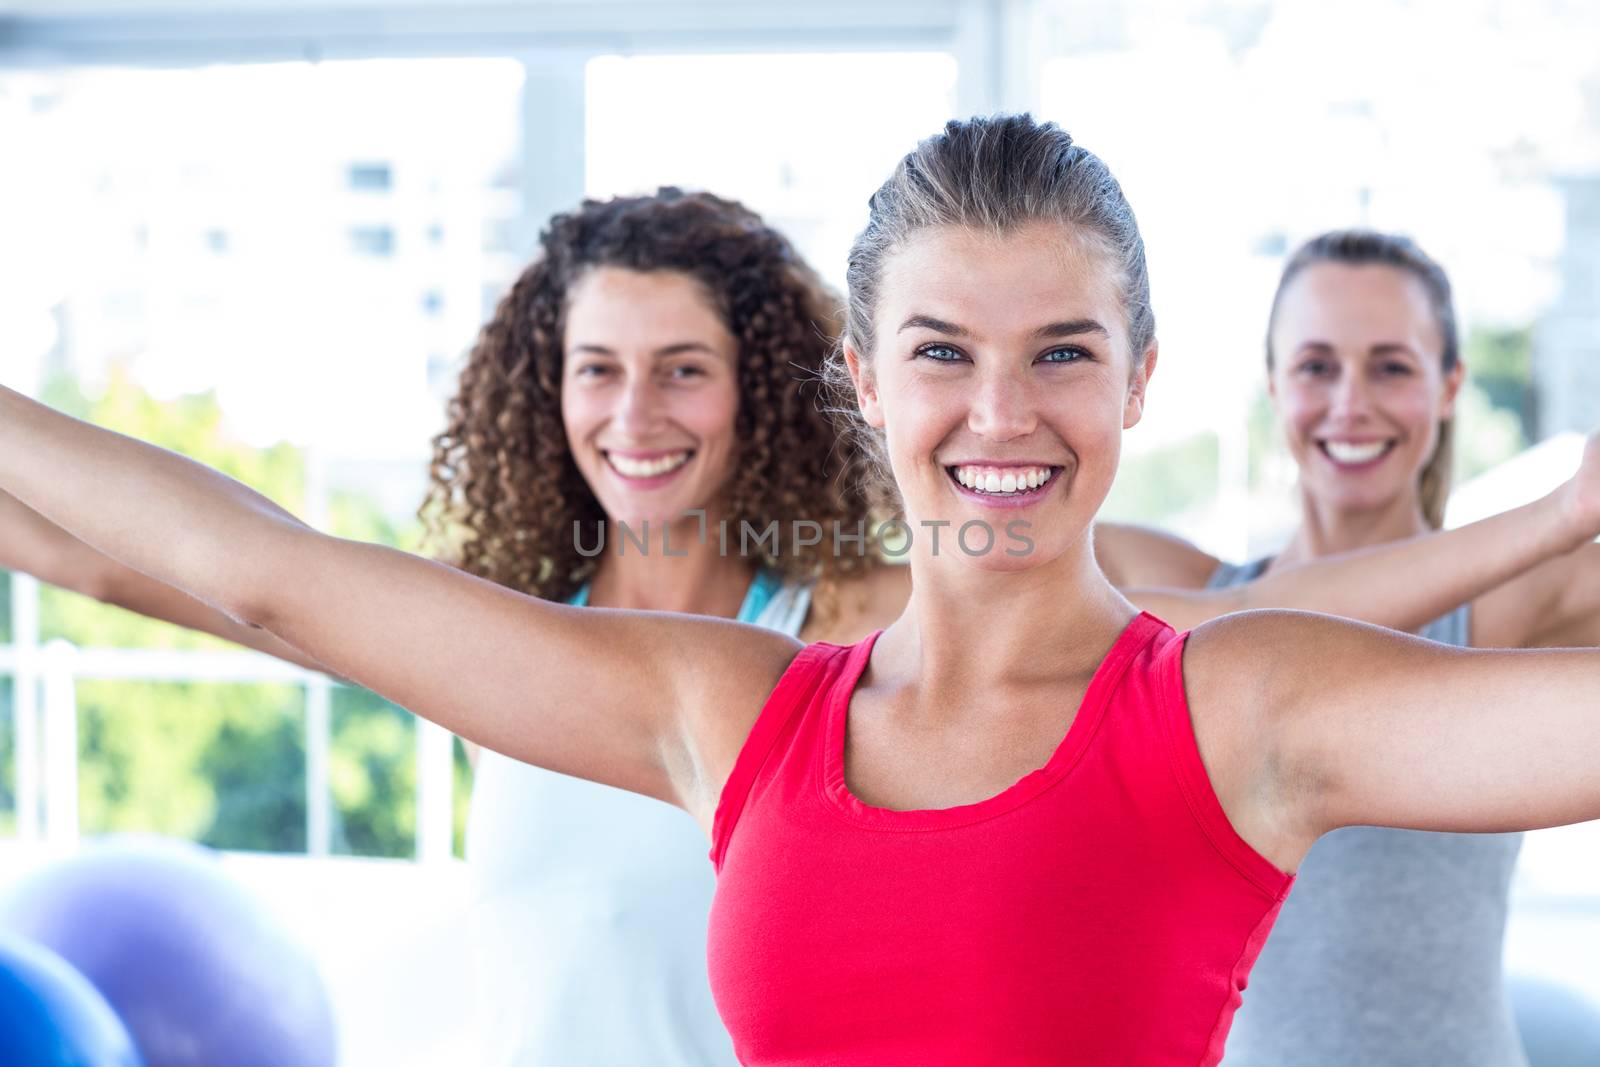 Portrait of cheerful women with arms outstretched in fitness studio